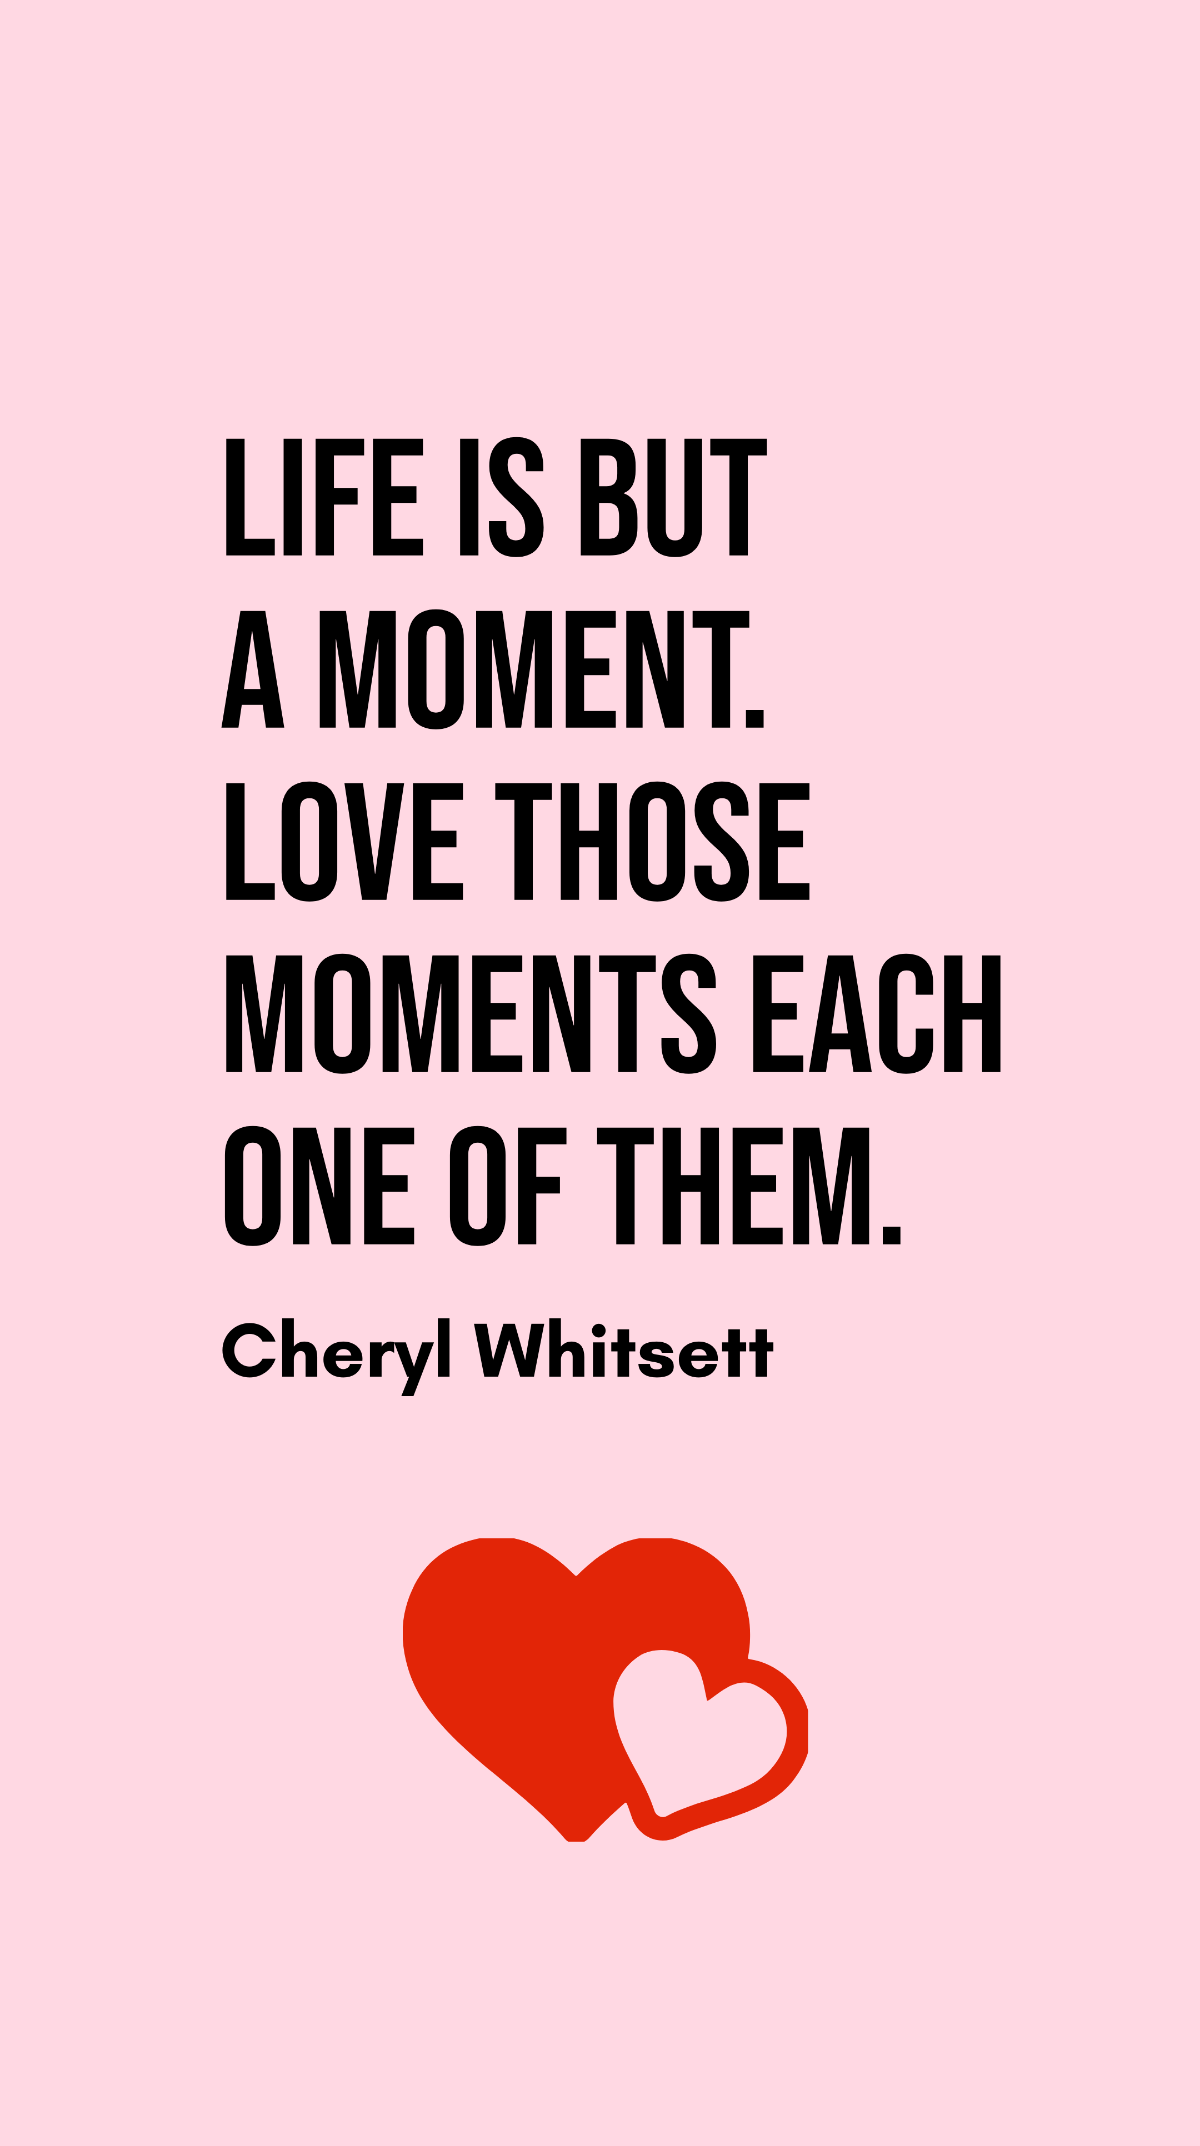 Free Cheryl Whitsett - Life is but a moment. Love those moments each one of them. Template